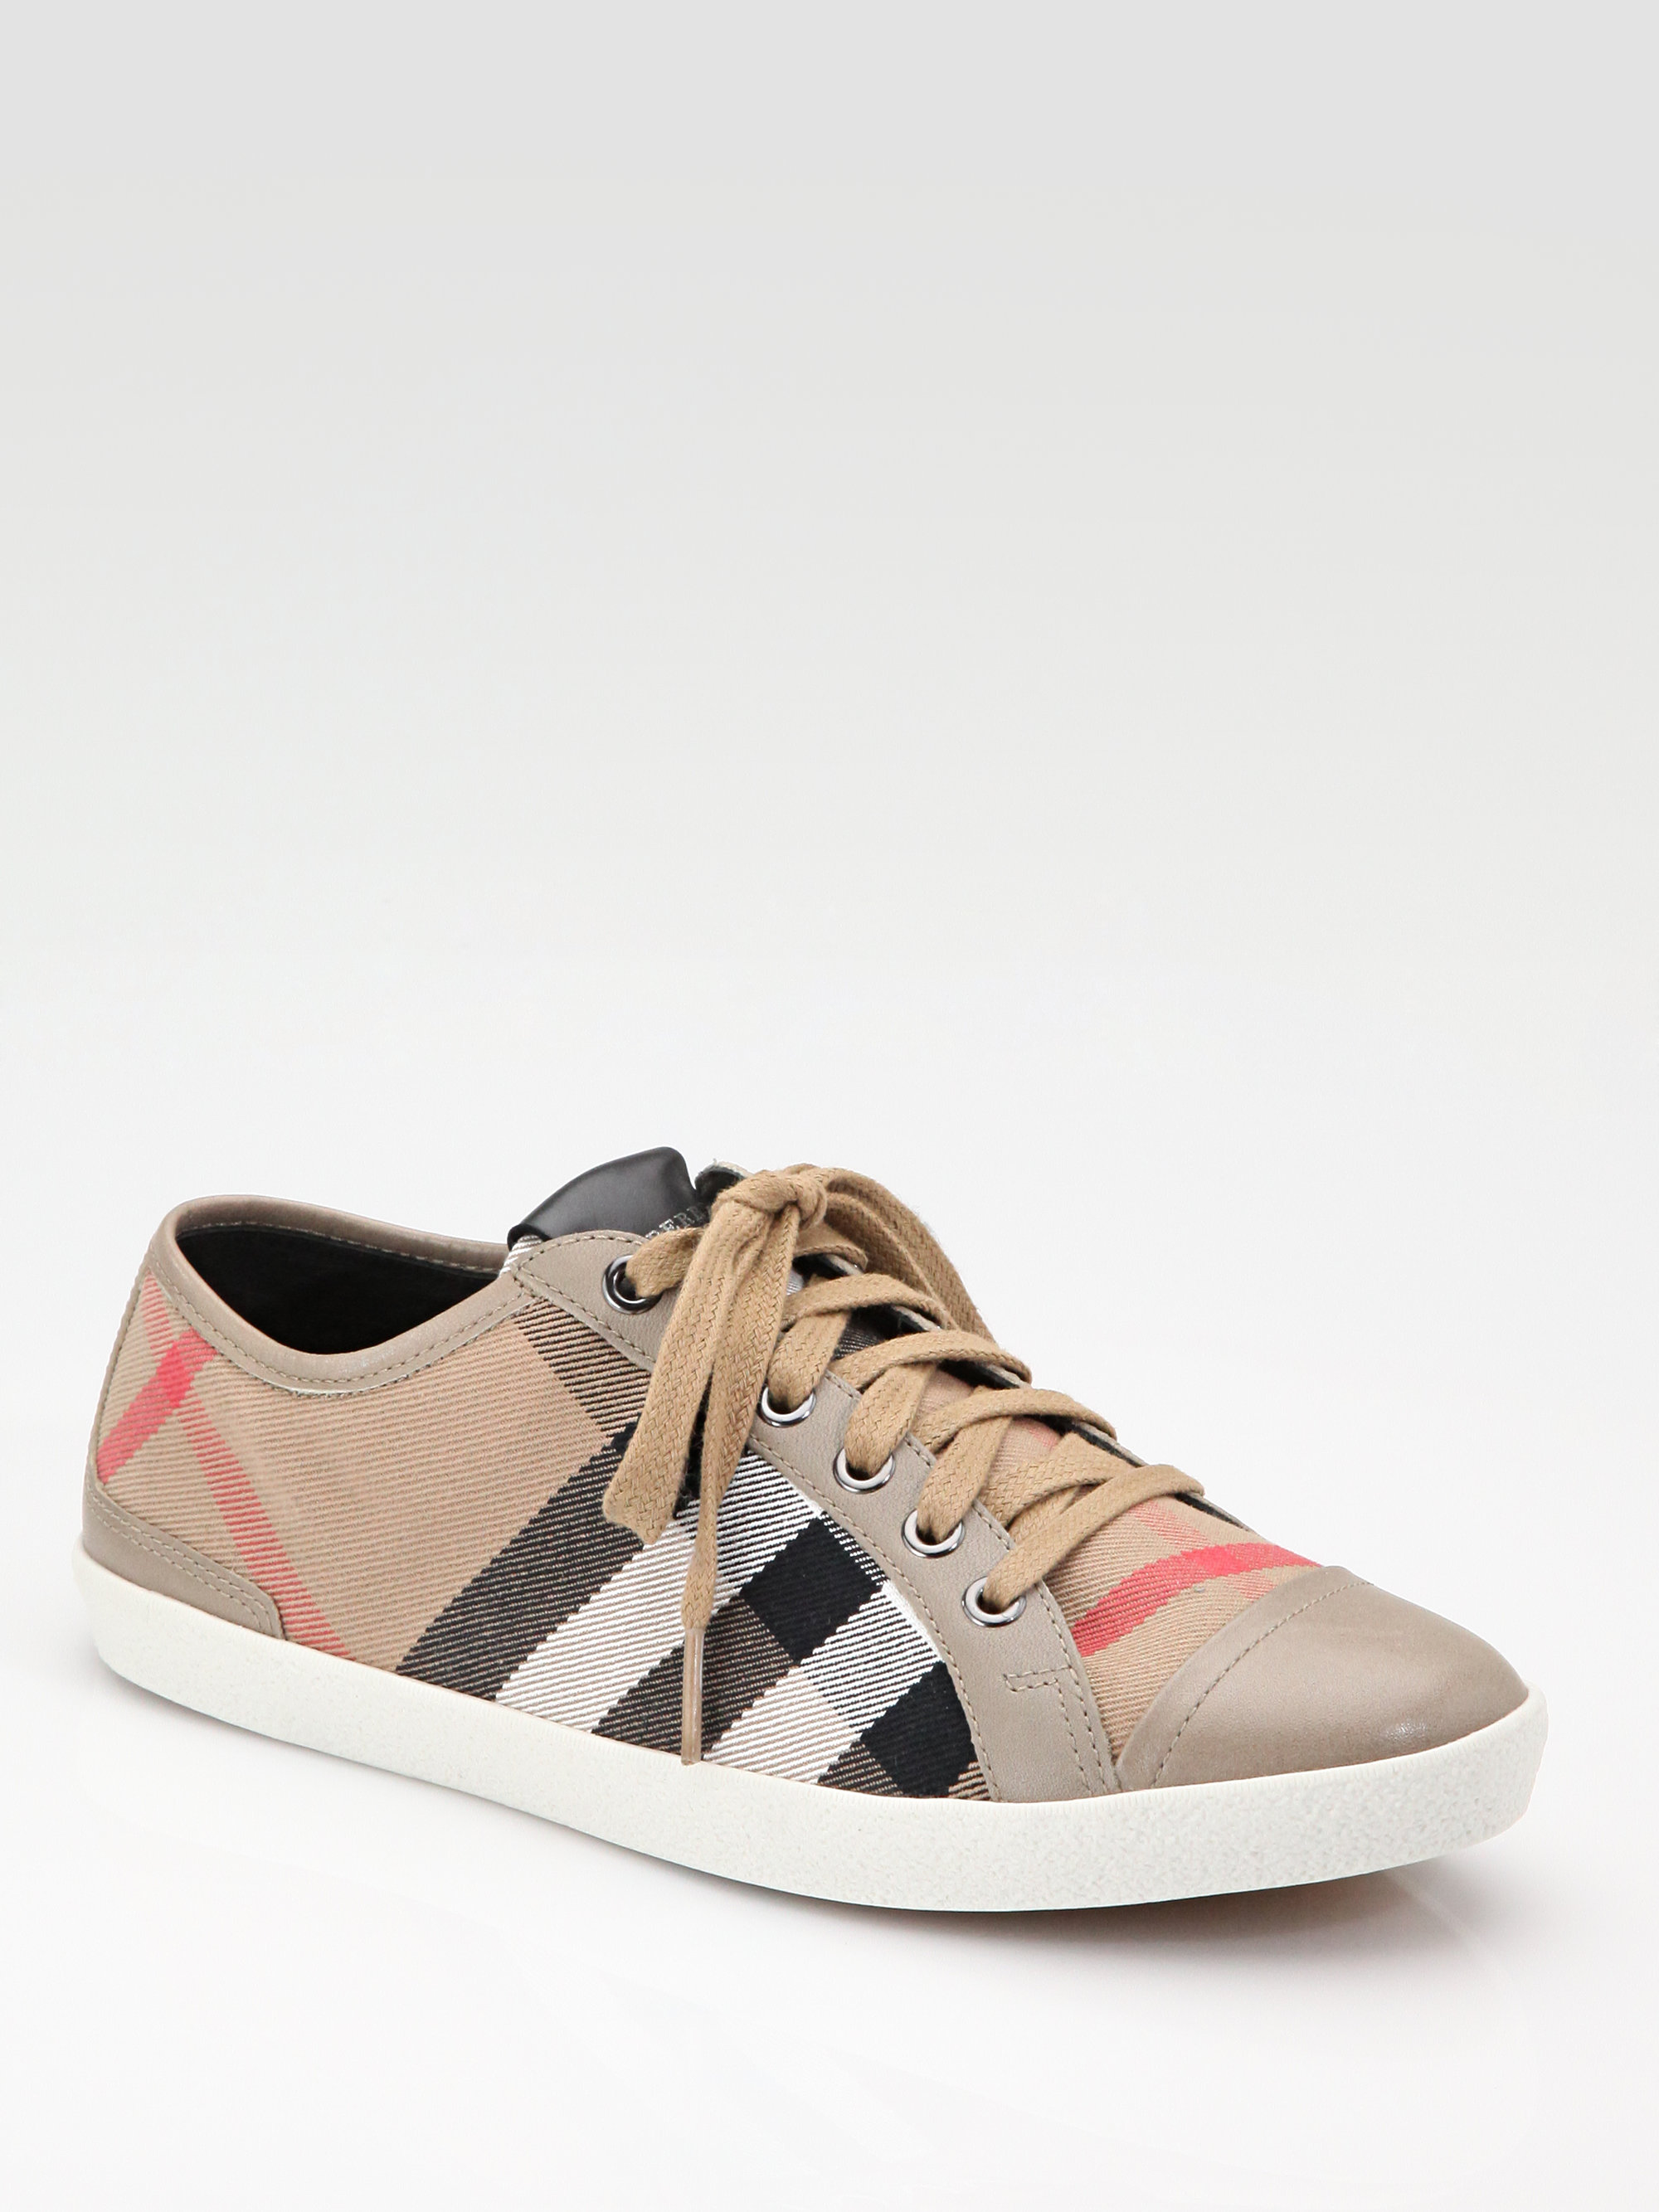 burberry sneakers womens 2013